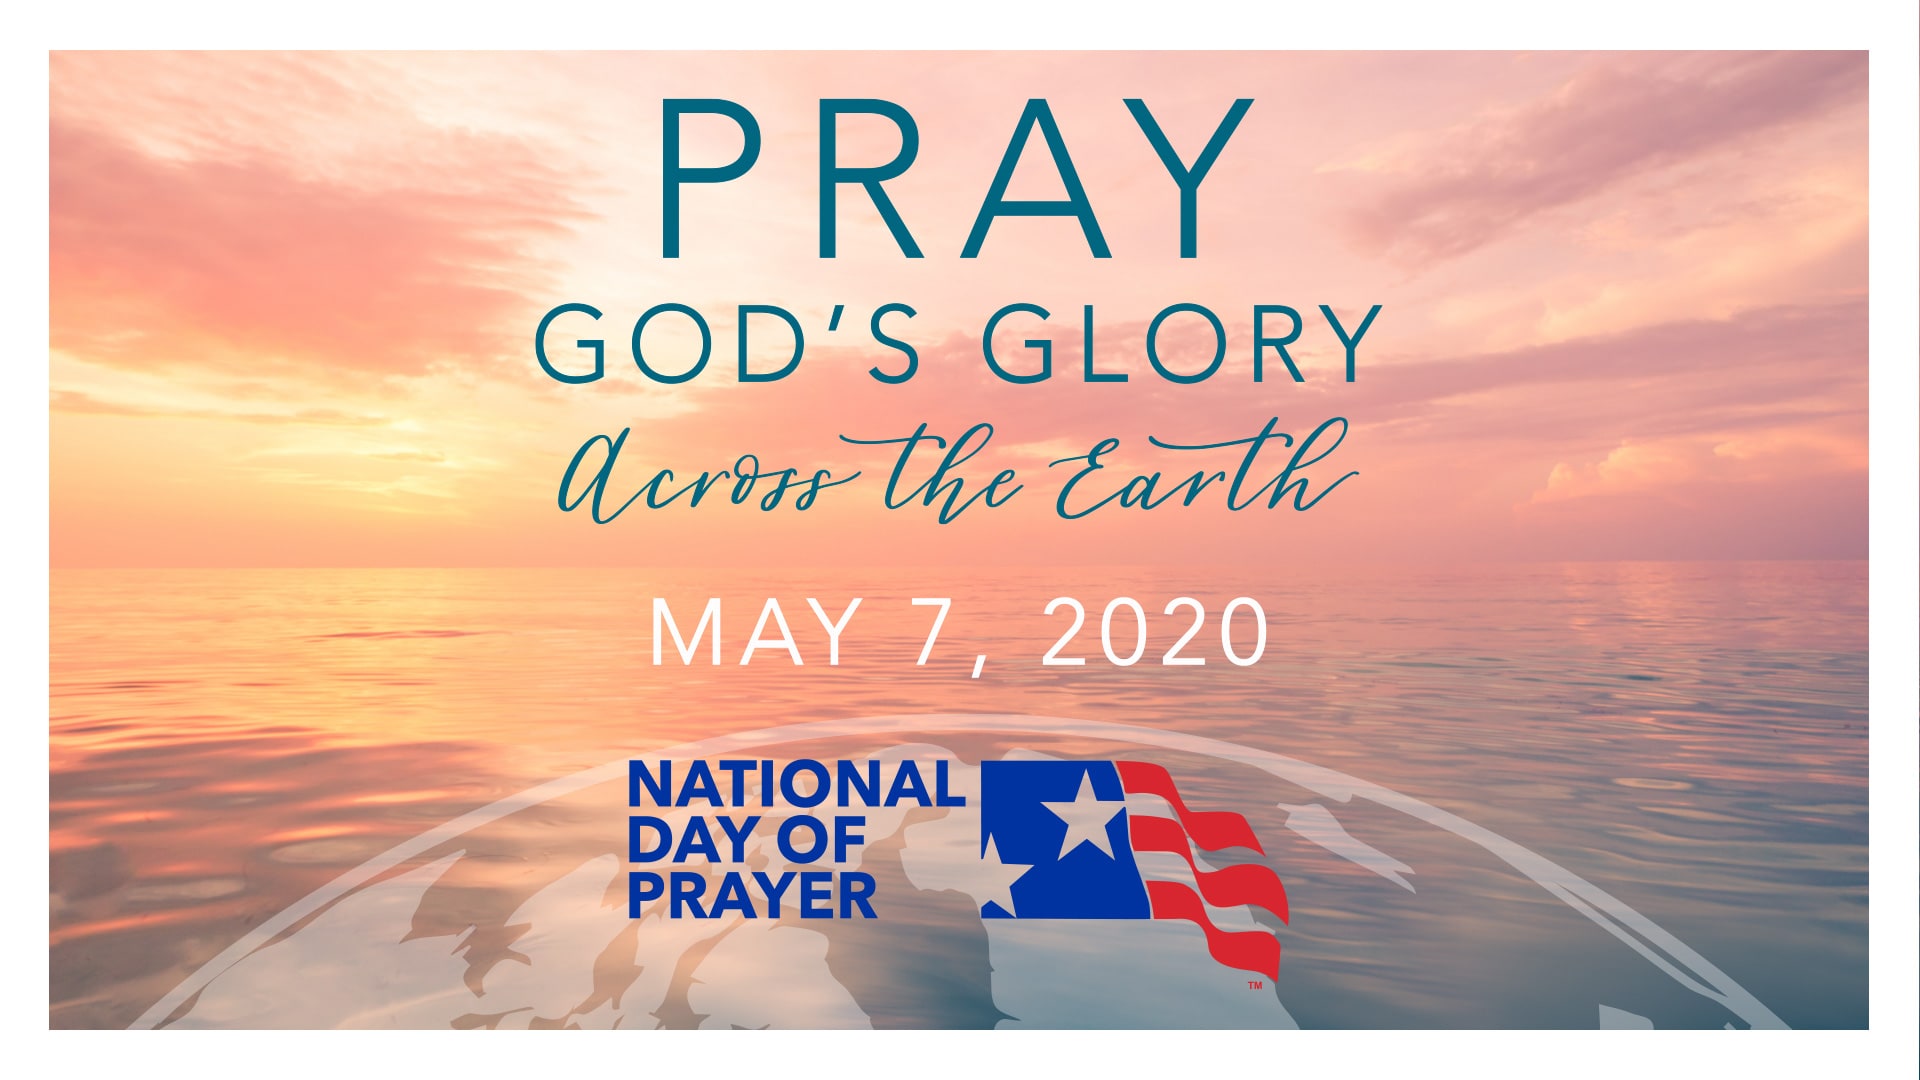 Southern Baptist Convention Urges Americans to Join Nationwide, Remote Prayer Gathering for Spiritual Awakening and Revival